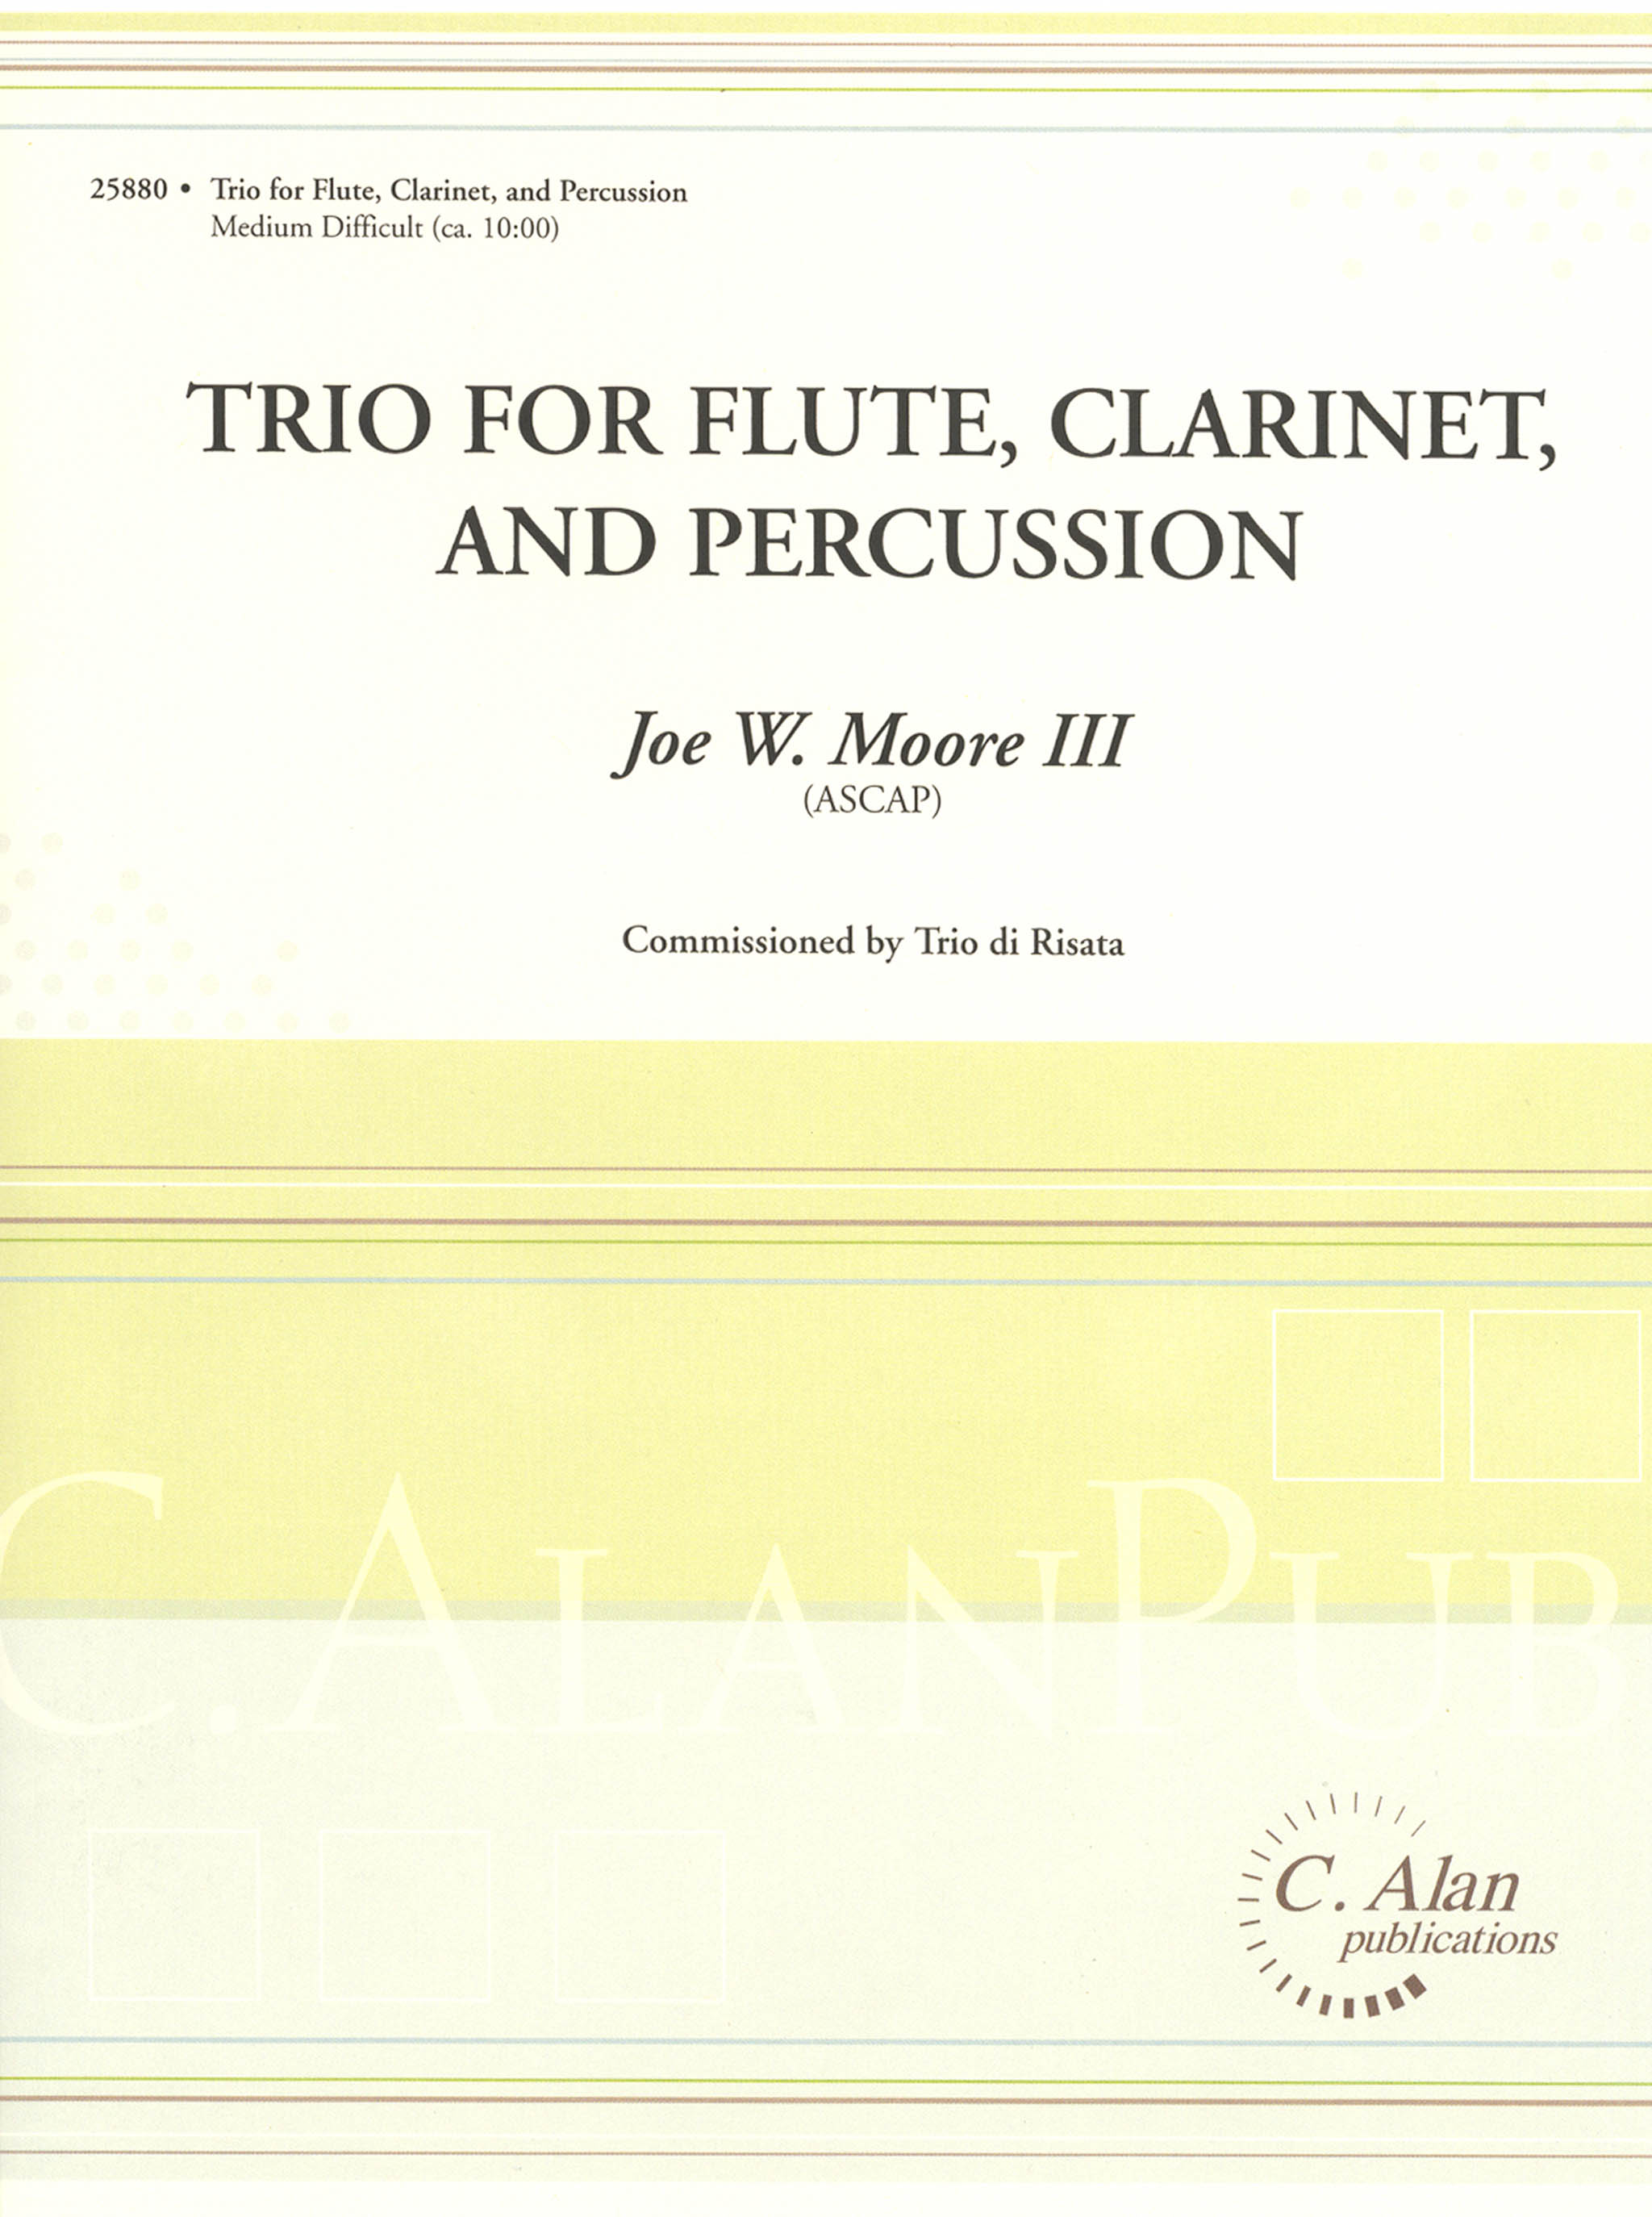 Joe W. Moore III: Trio for flute, clarinet and percussion cover